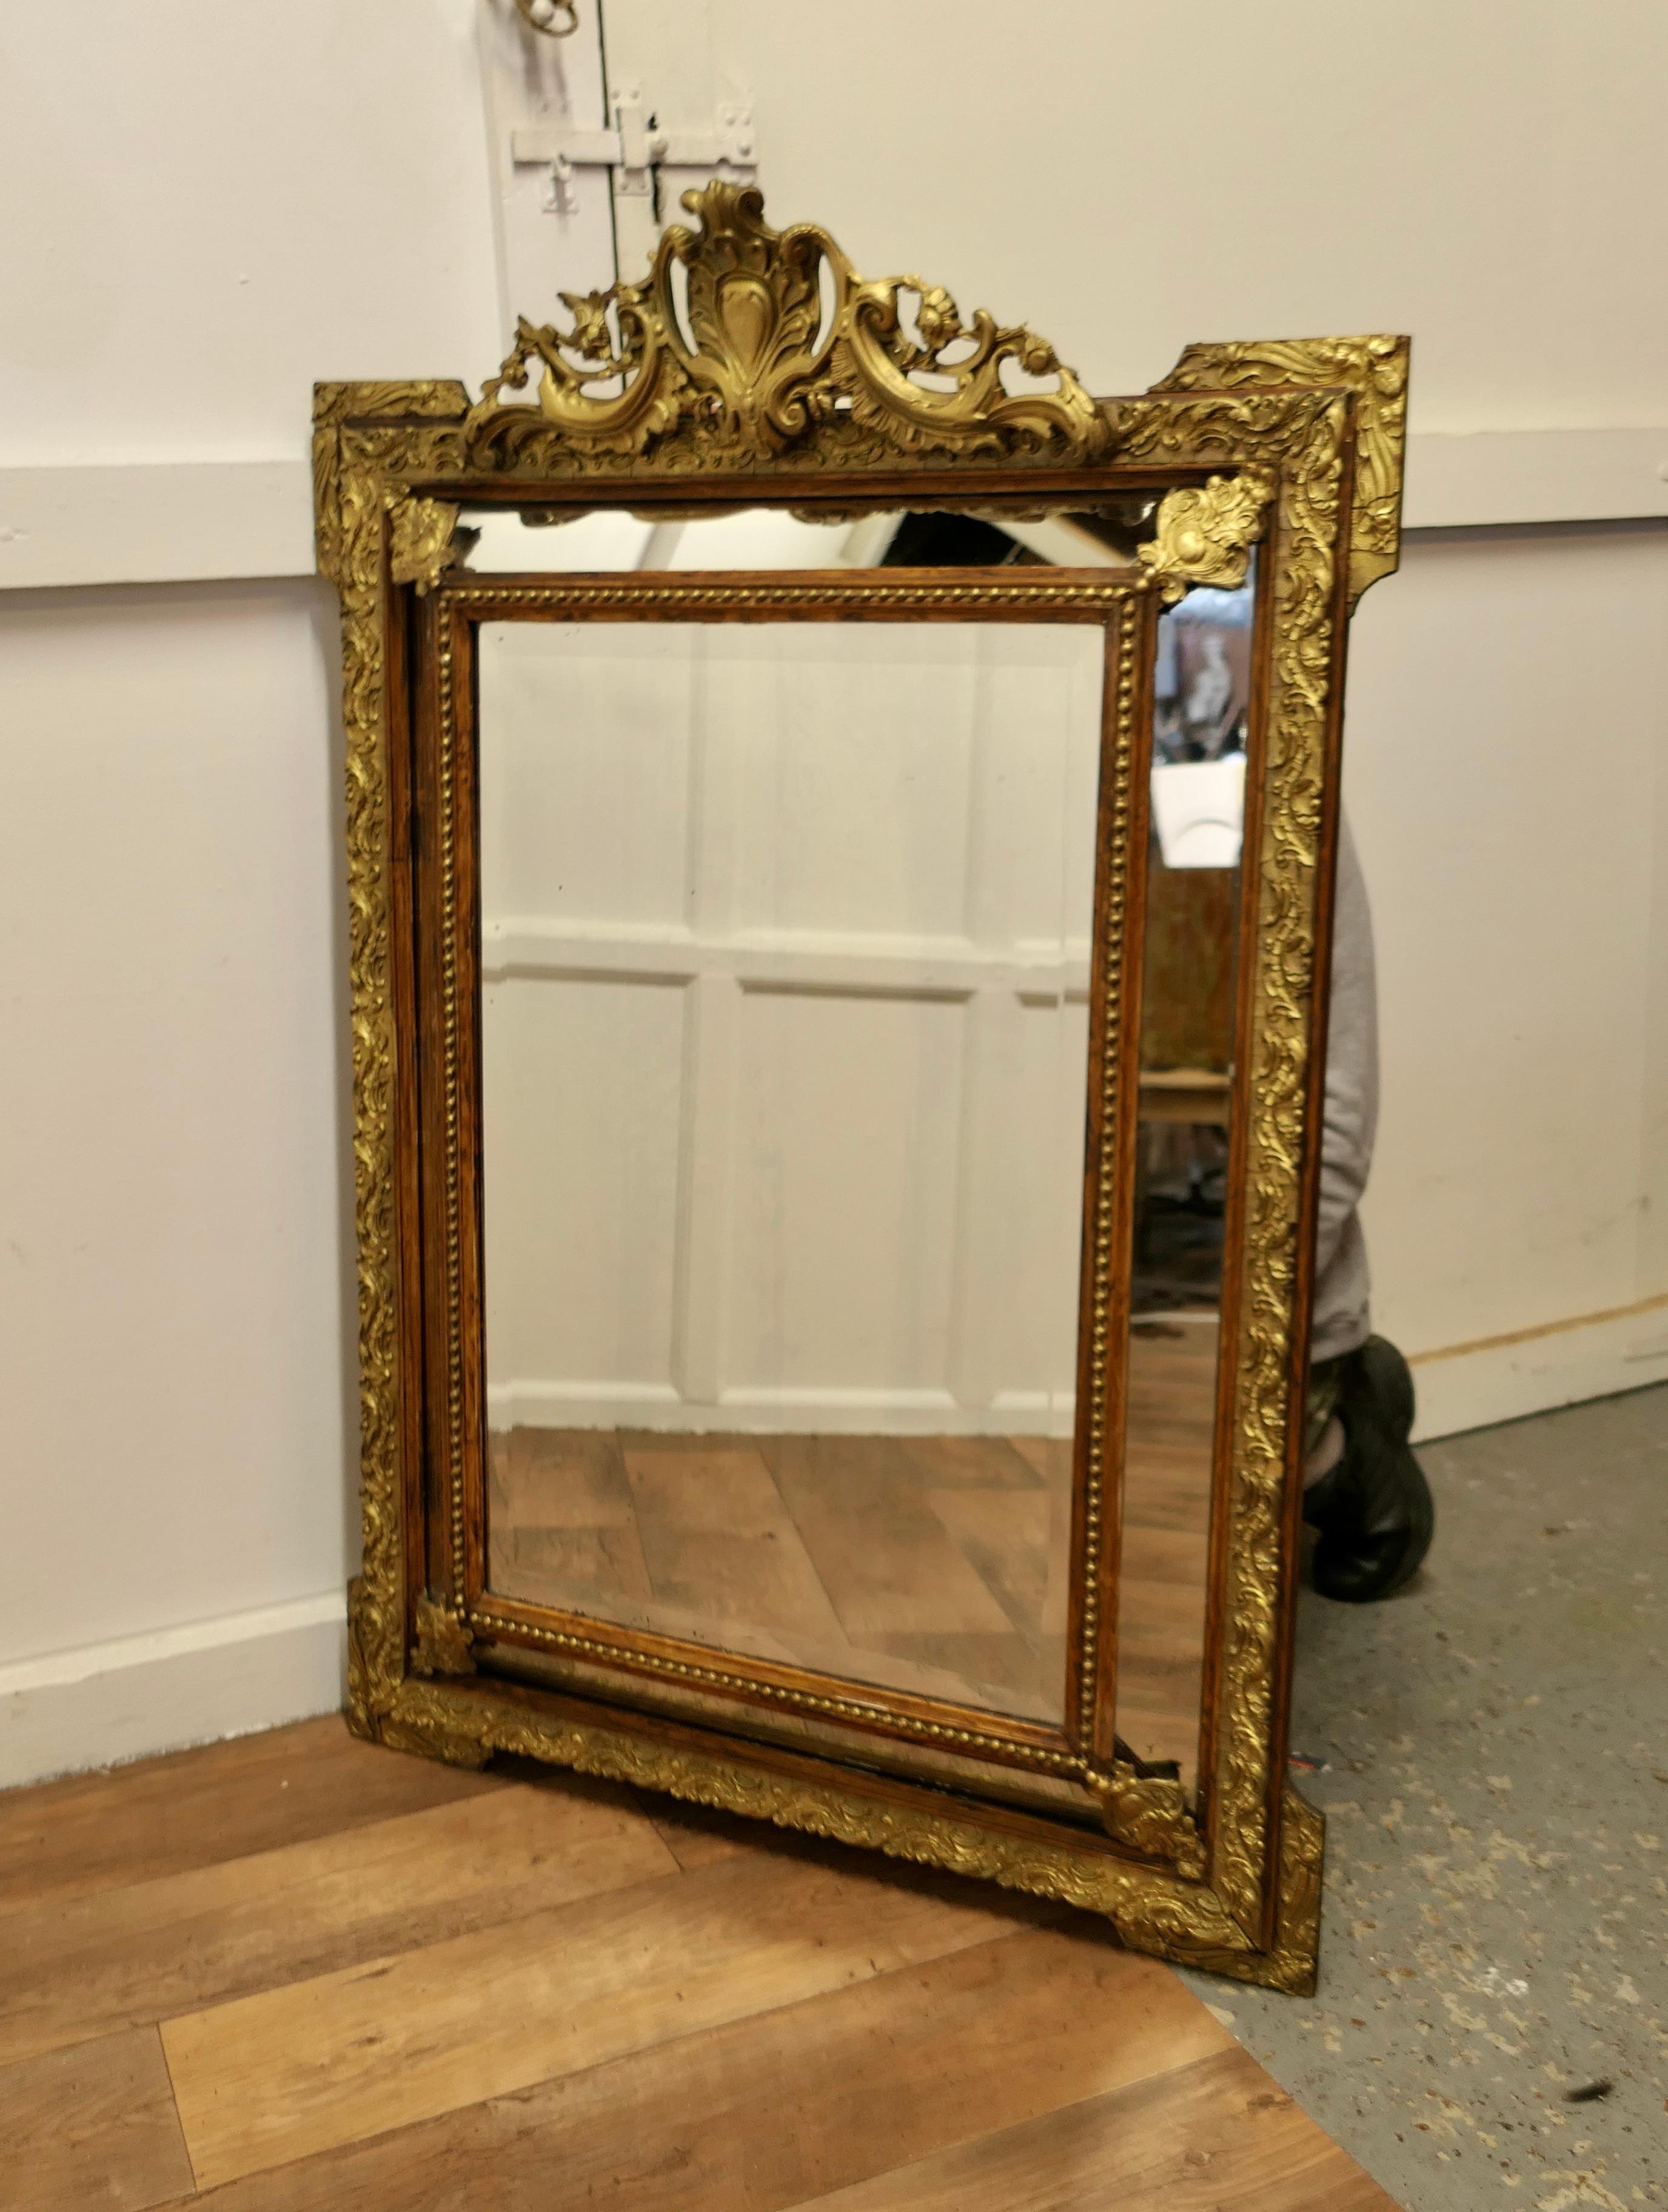 A Stunning Napoleon III French Cushion Mirror

This is an exquisite piece a fine example of Mirrors of this type, the centre Glass is Framed with smaller angled mirrors all around 

There is an elaborate Gesso and Gilt Crest on the top of the